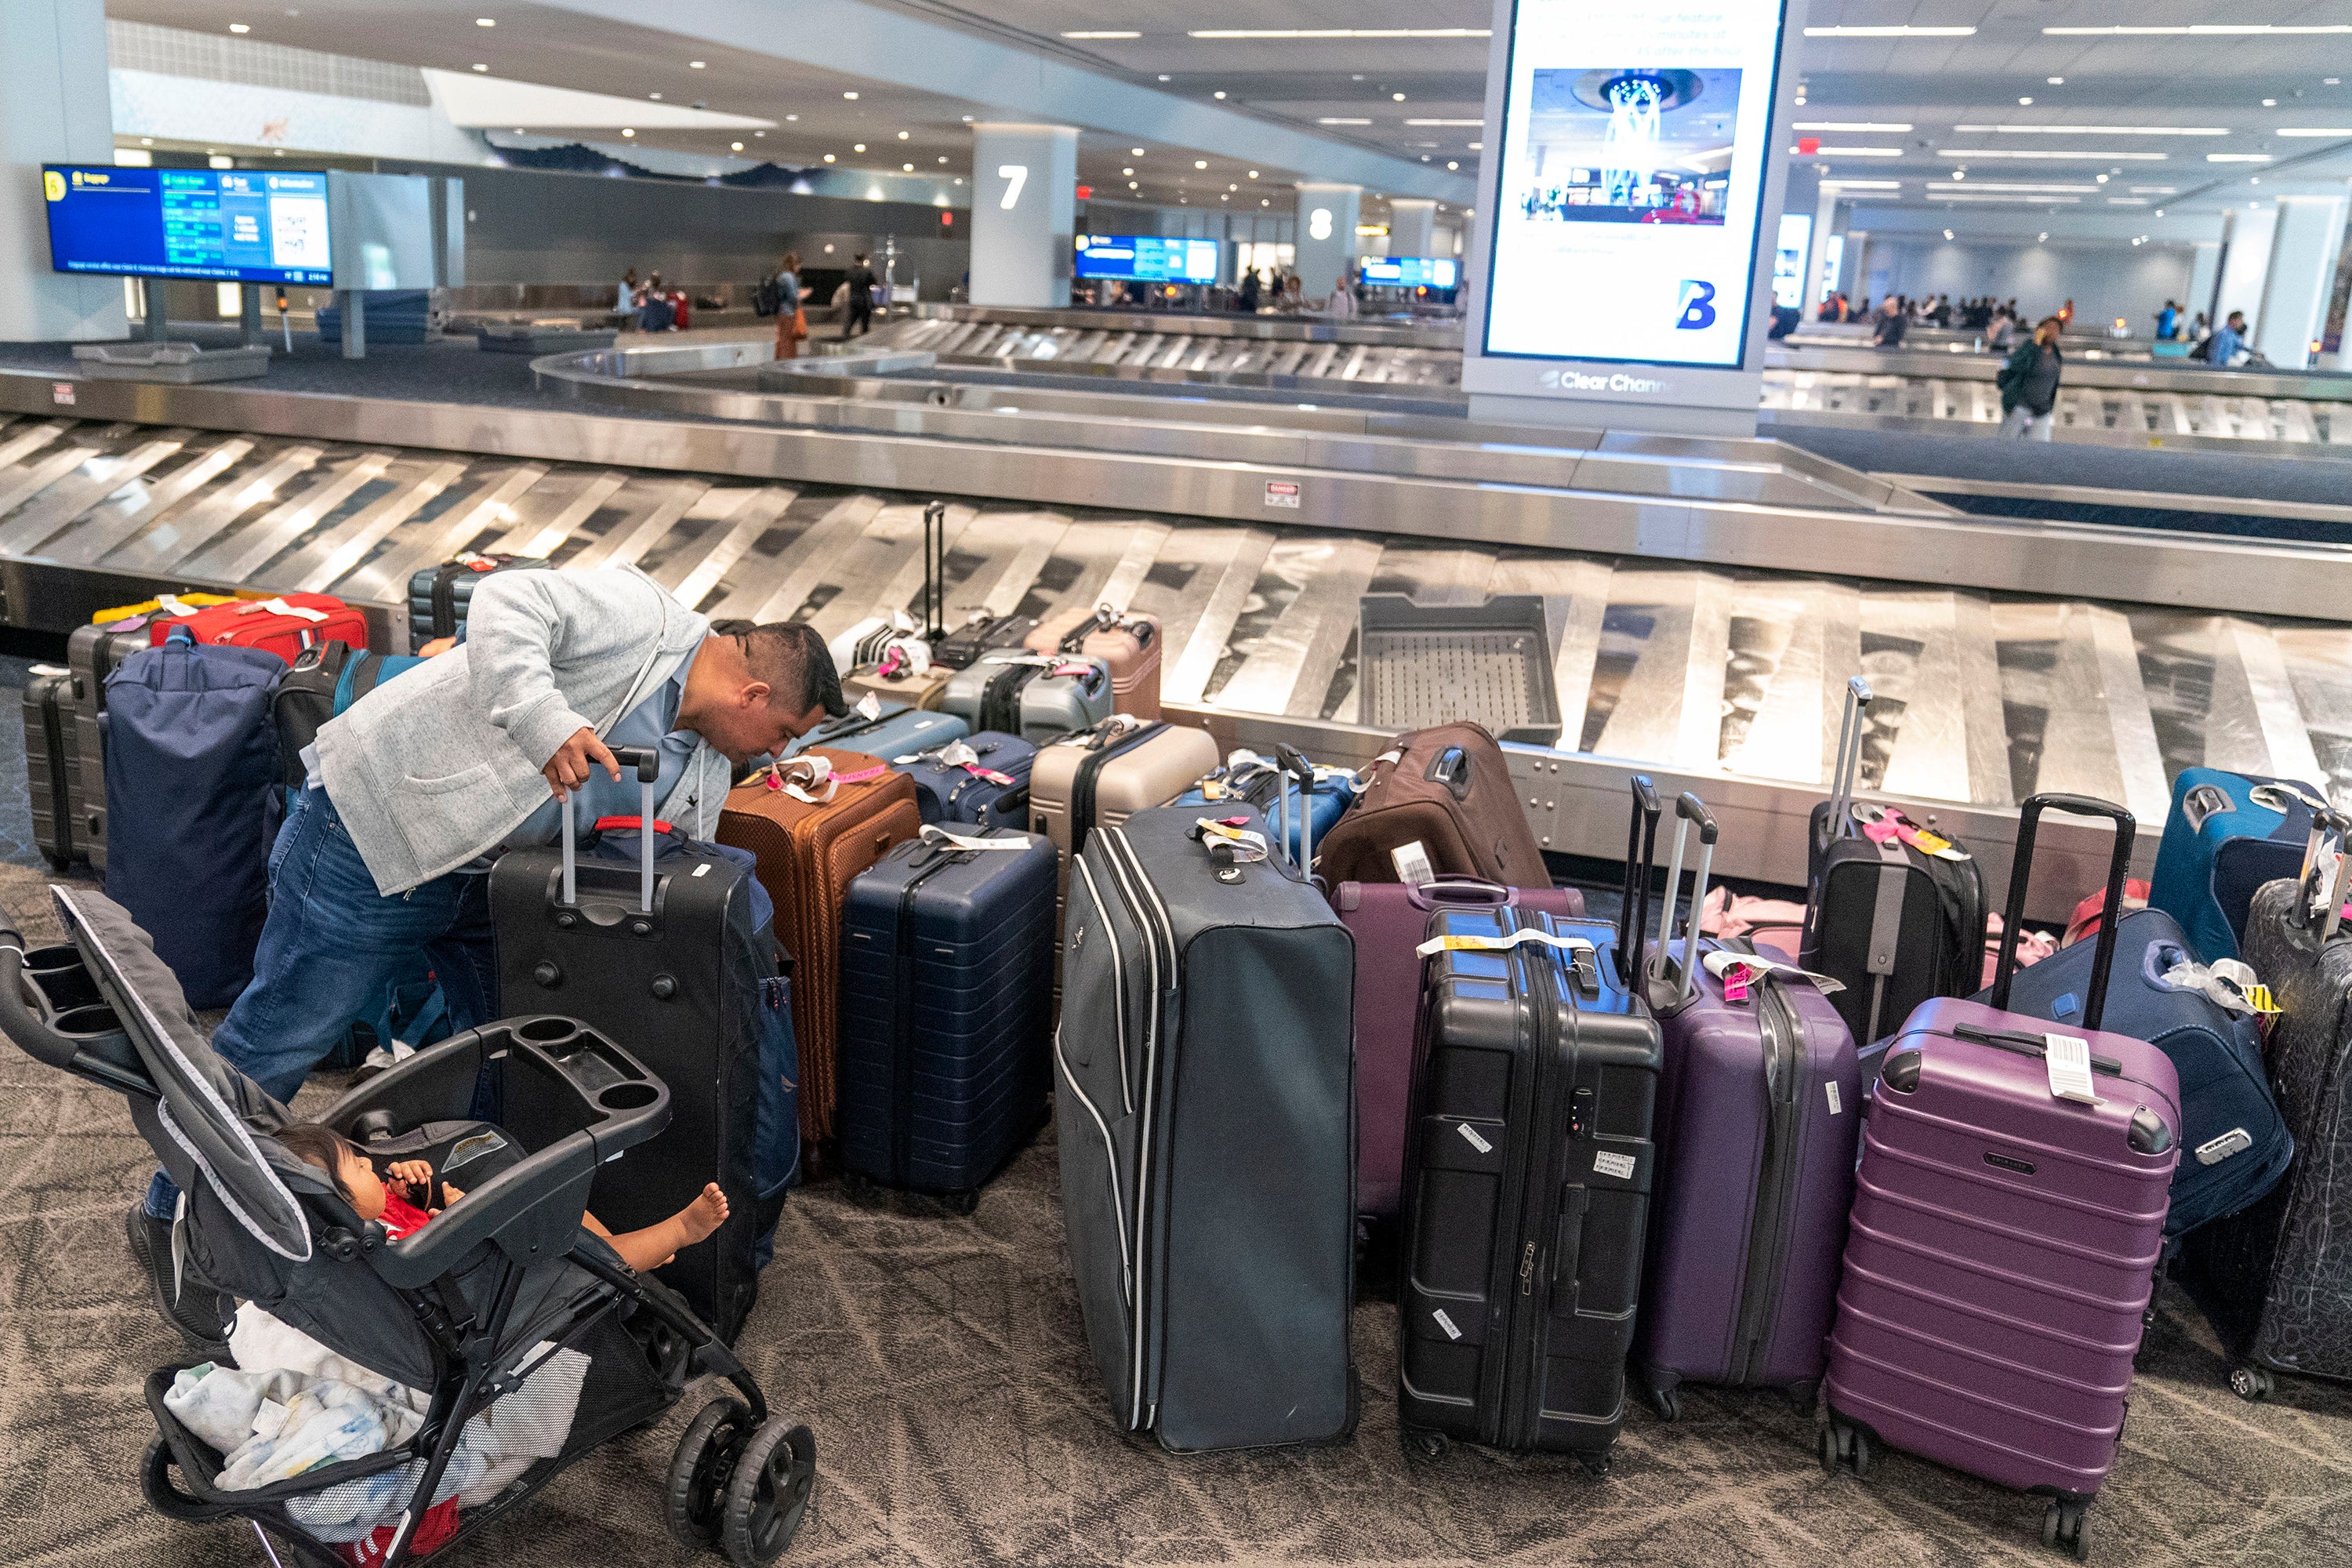 Baggage sits unclaimed at LaGuardia Airport amid delays on Tuesday